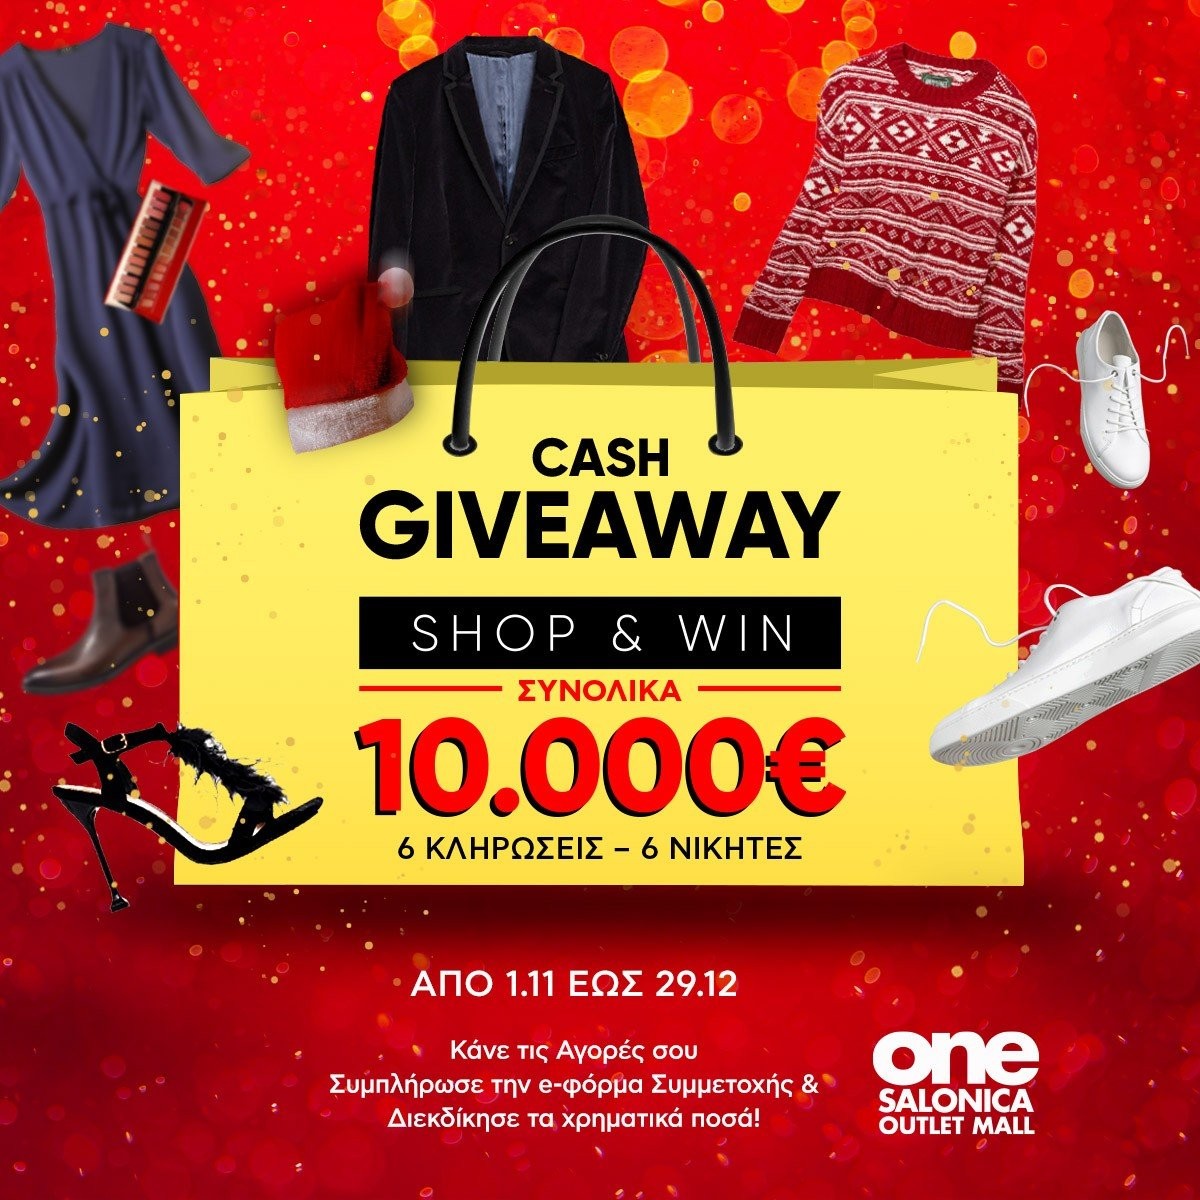 cash-giveaway-at-one-salonica.jpg